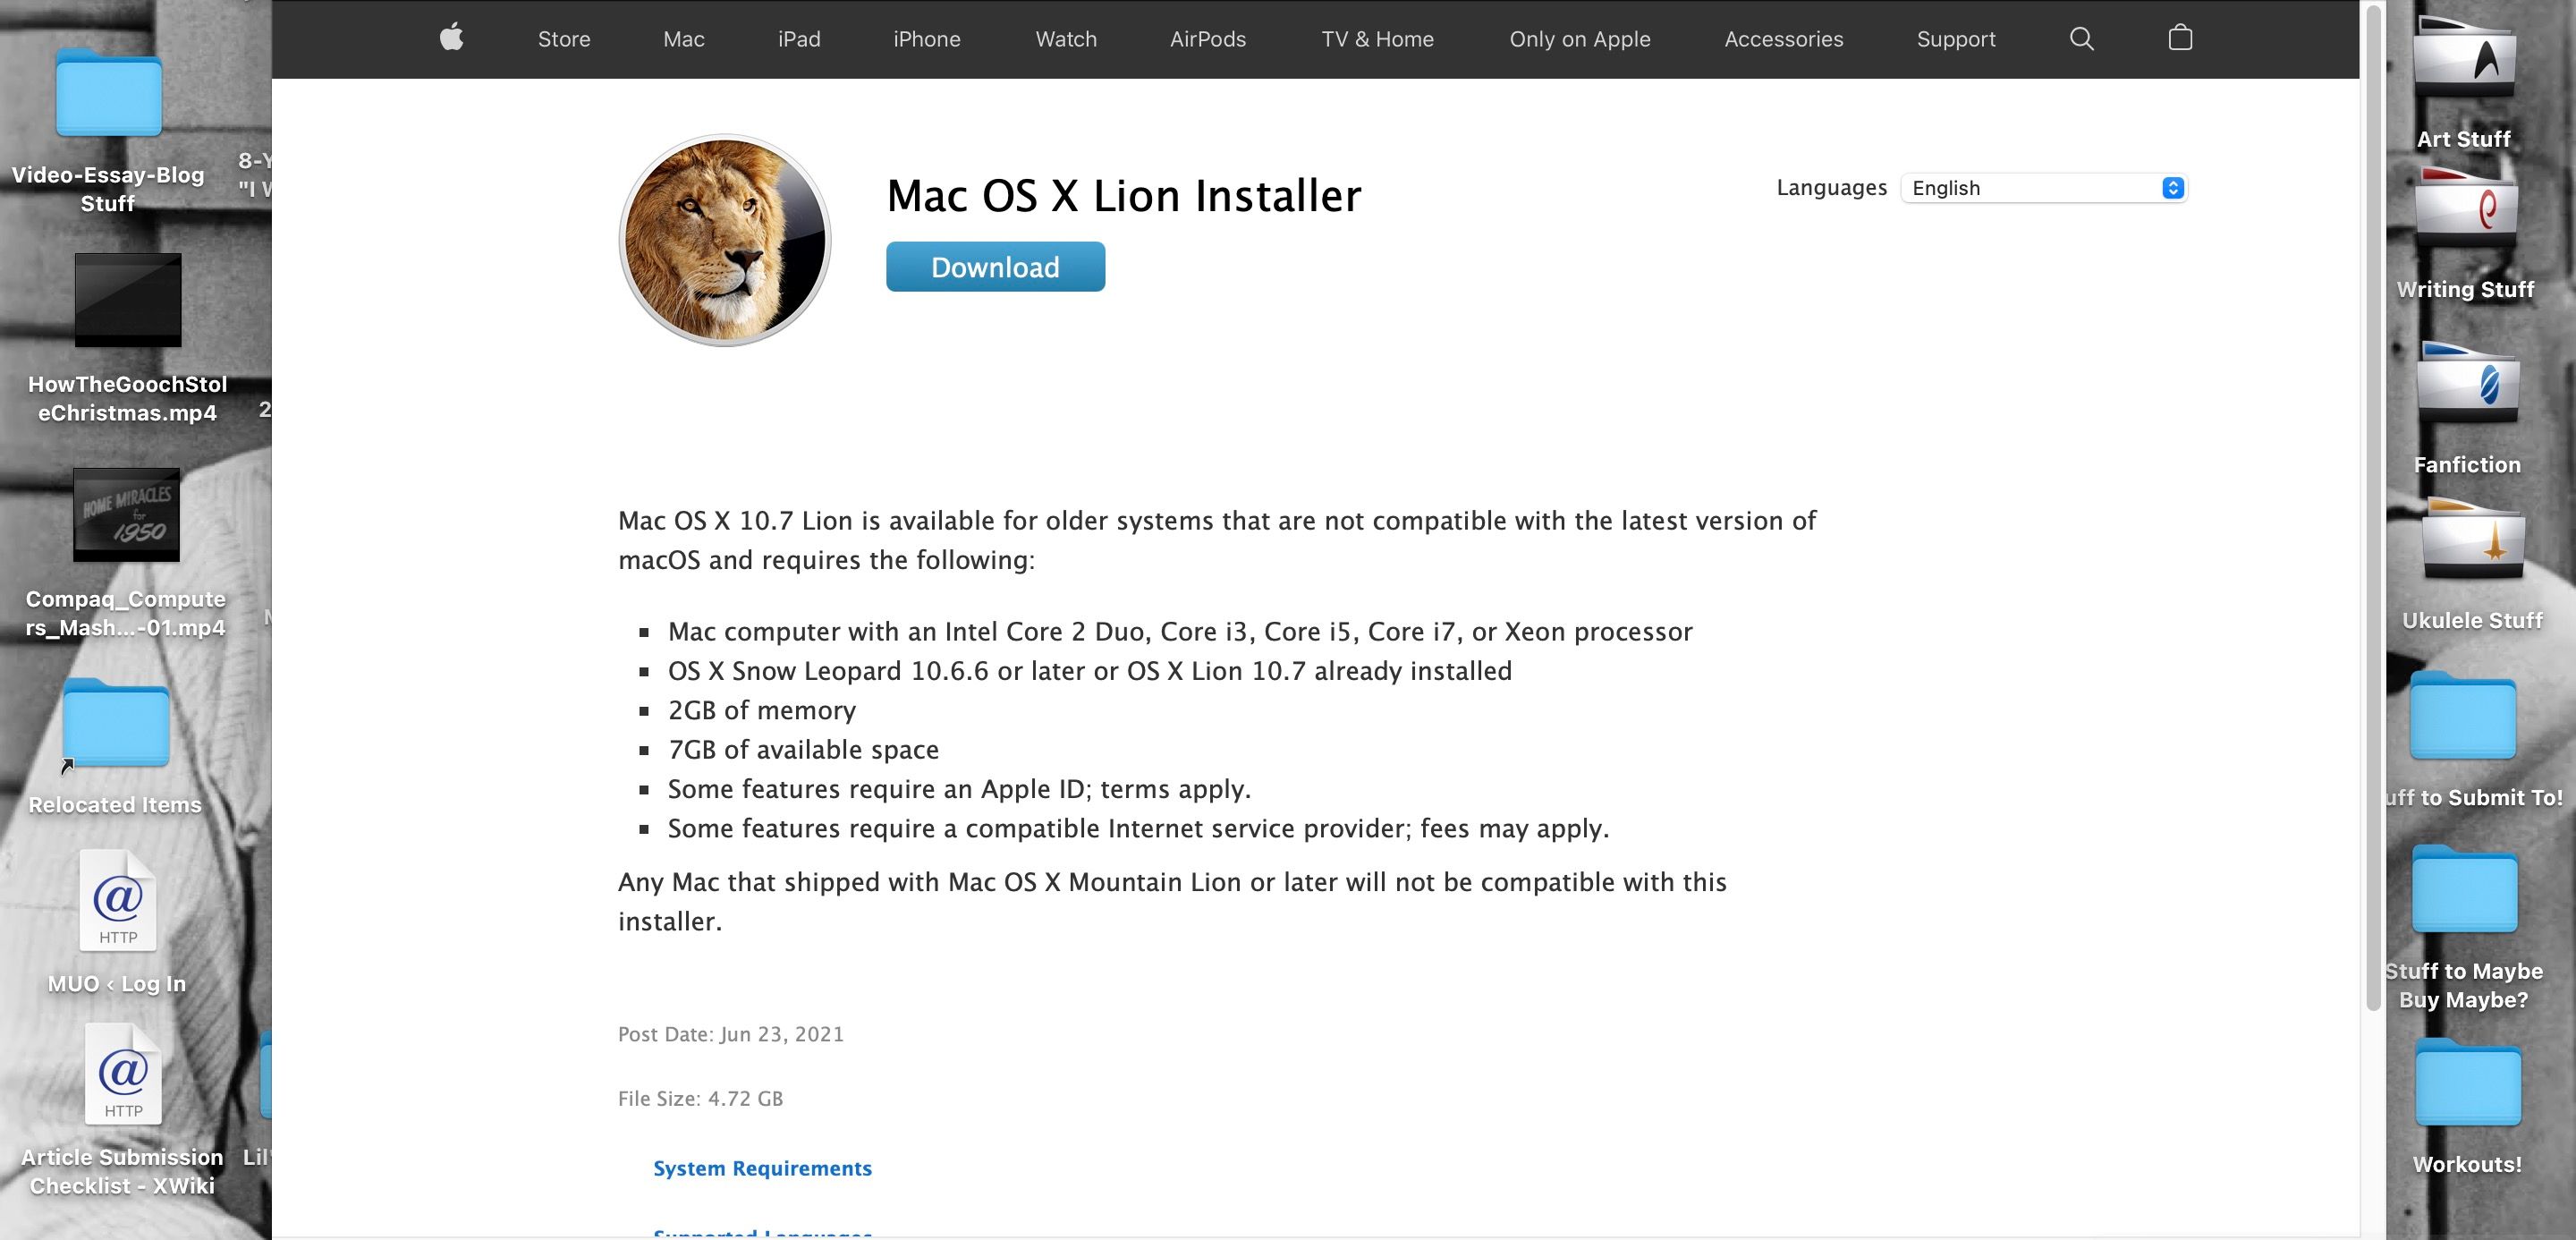 Mac OS X Lion installer page on the Apple website